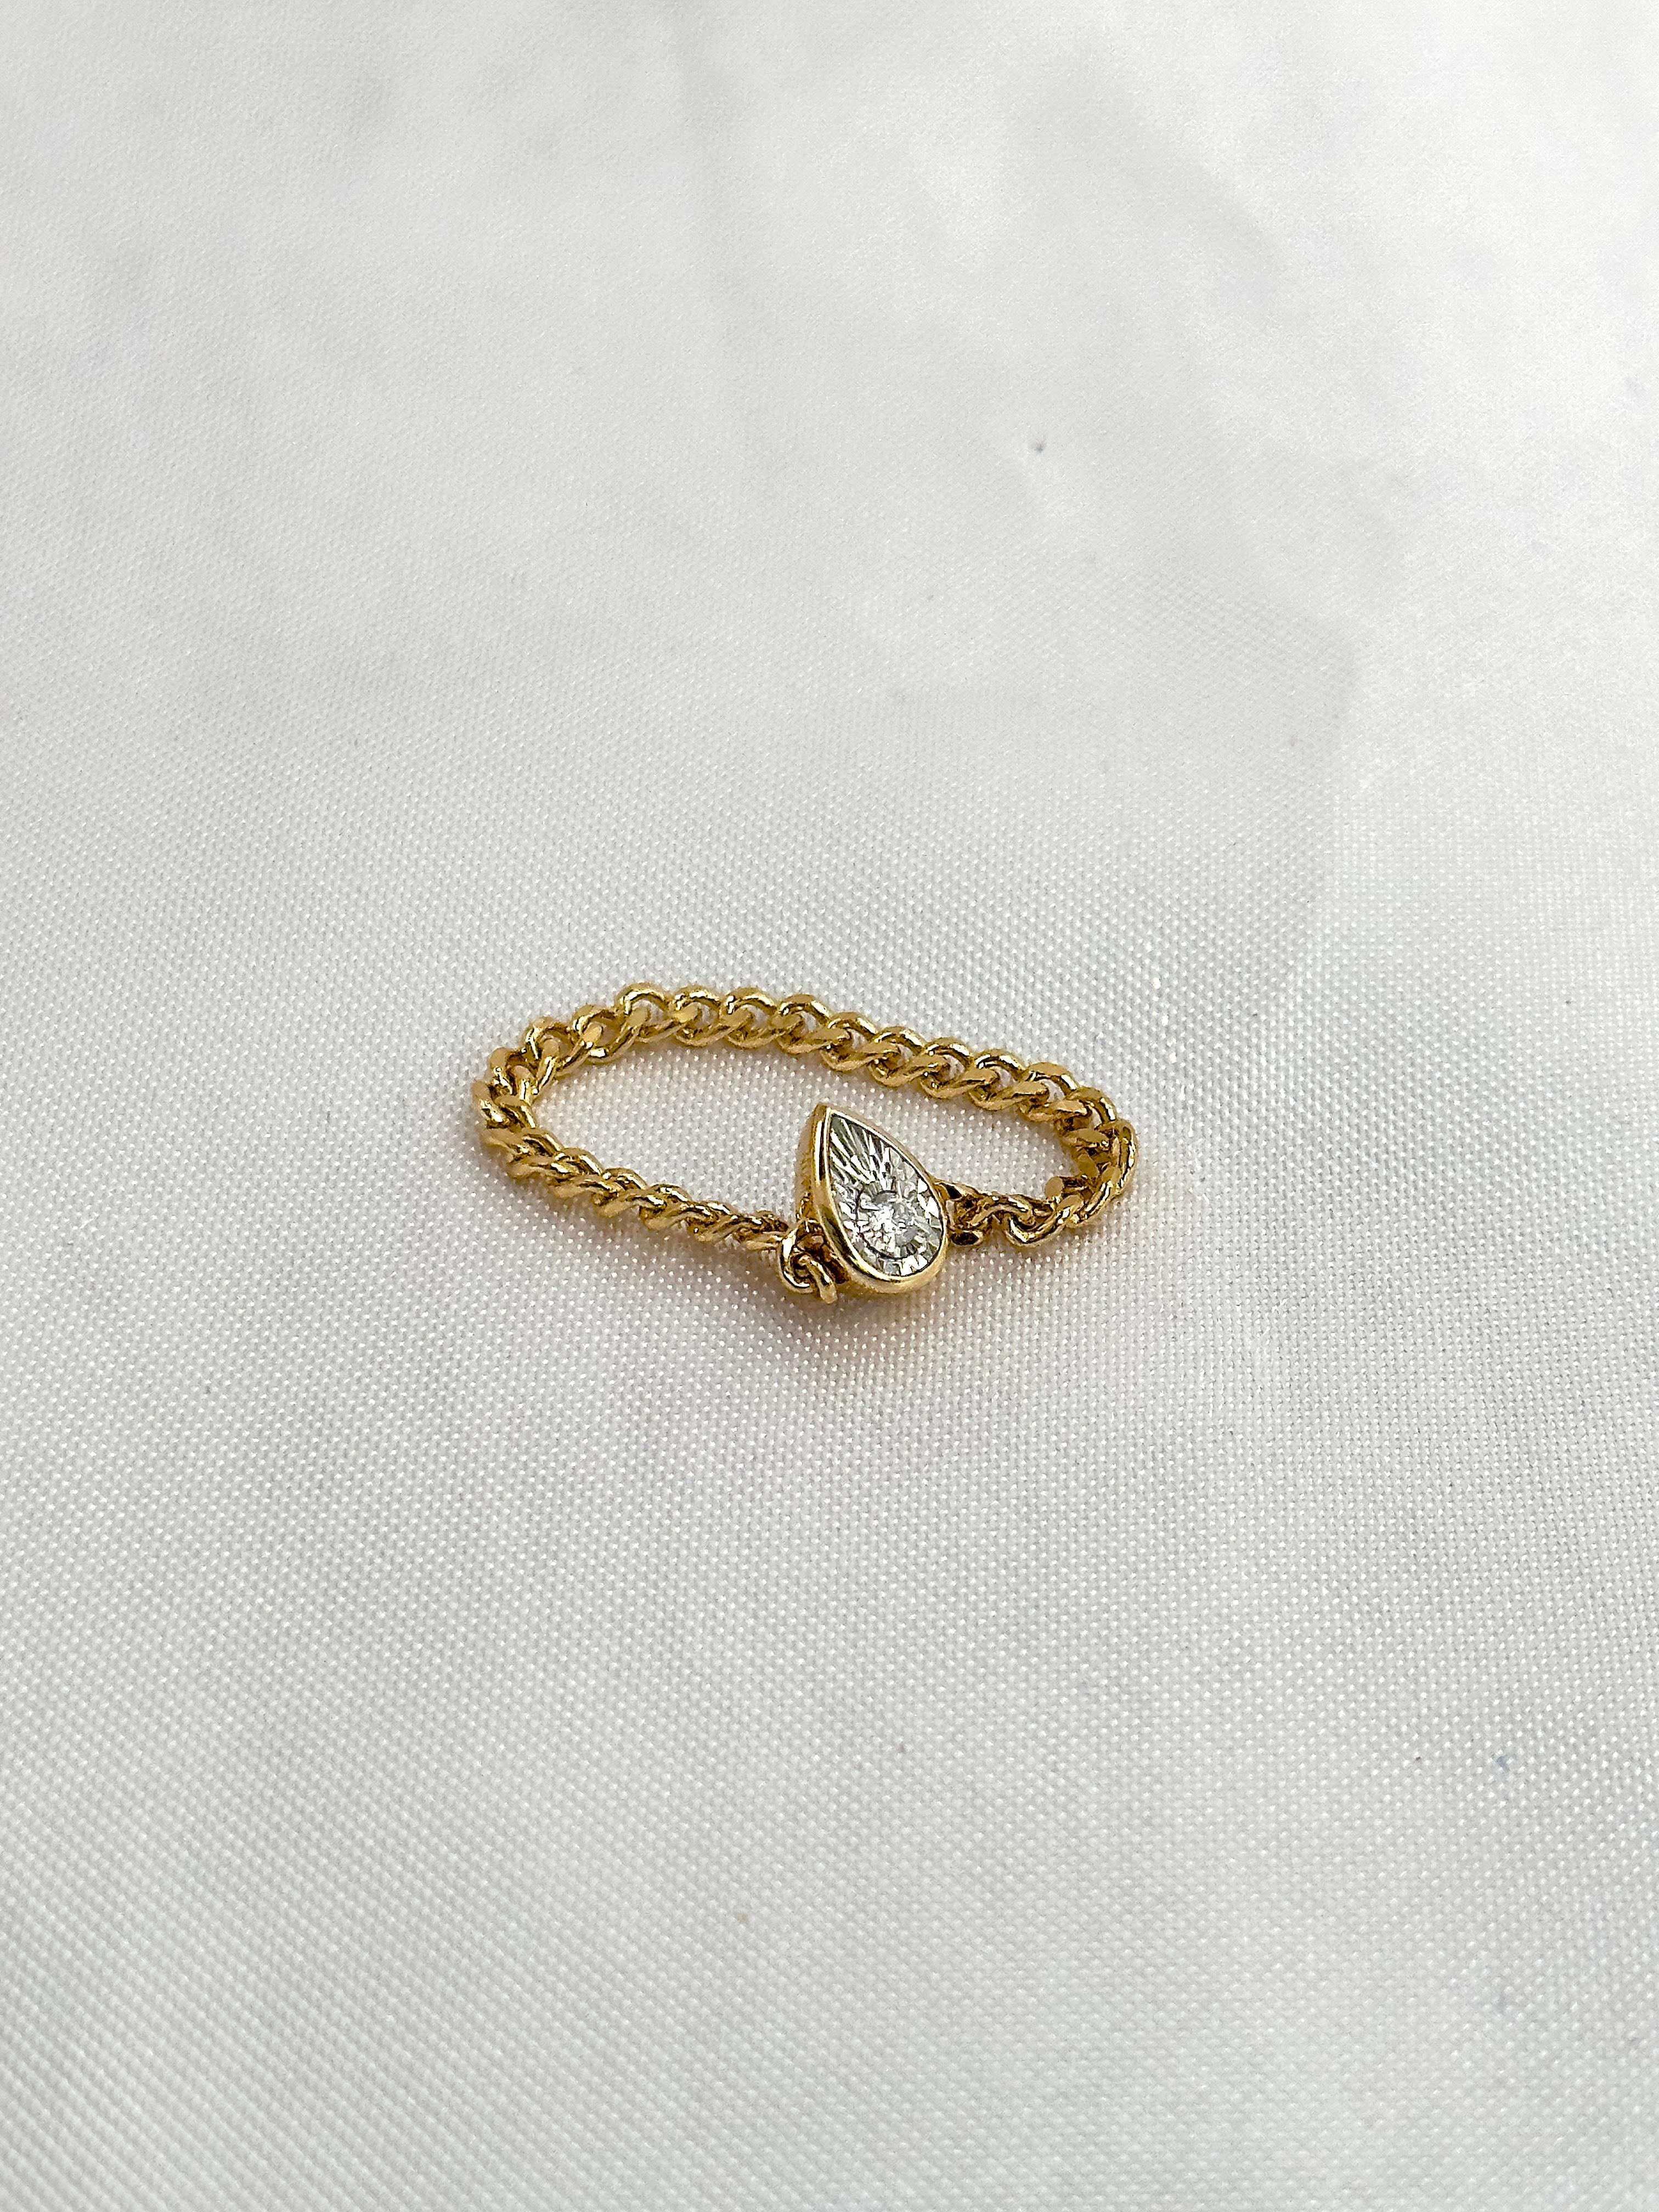 Modern Diamond Chain Ring, Solid Gold Chain Ring, Stackable Chain Ring, Natural Diamond For Sale